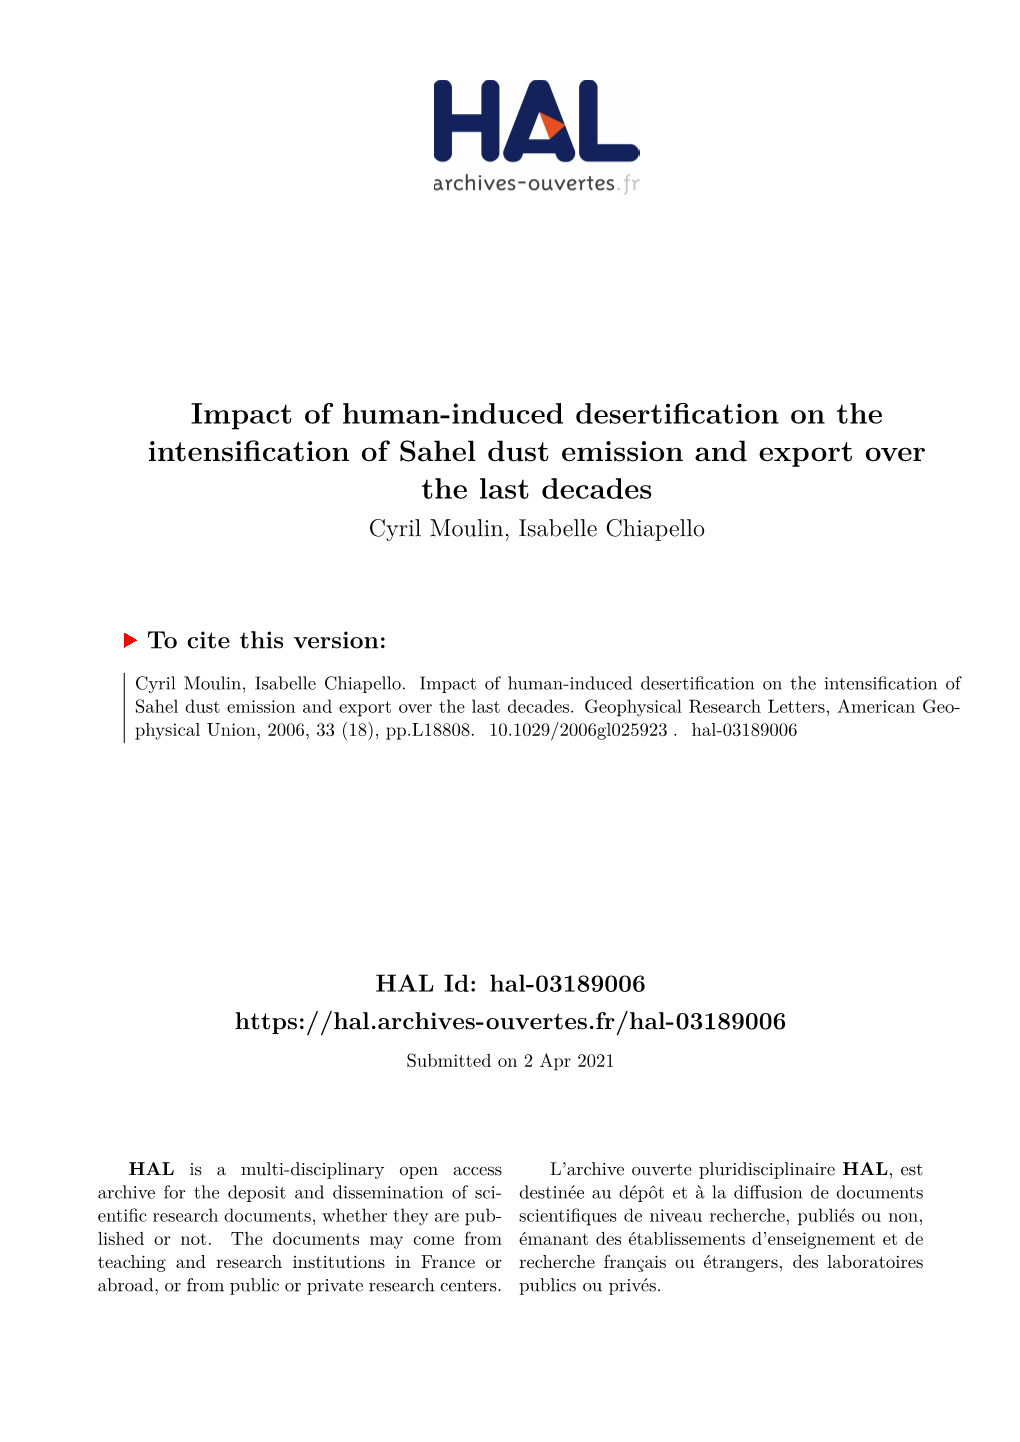 Impact of Human-Induced Desertification on the Intensification of Sahel Dust Emission and Export Over the Last Decades Cyril Moulin, Isabelle Chiapello